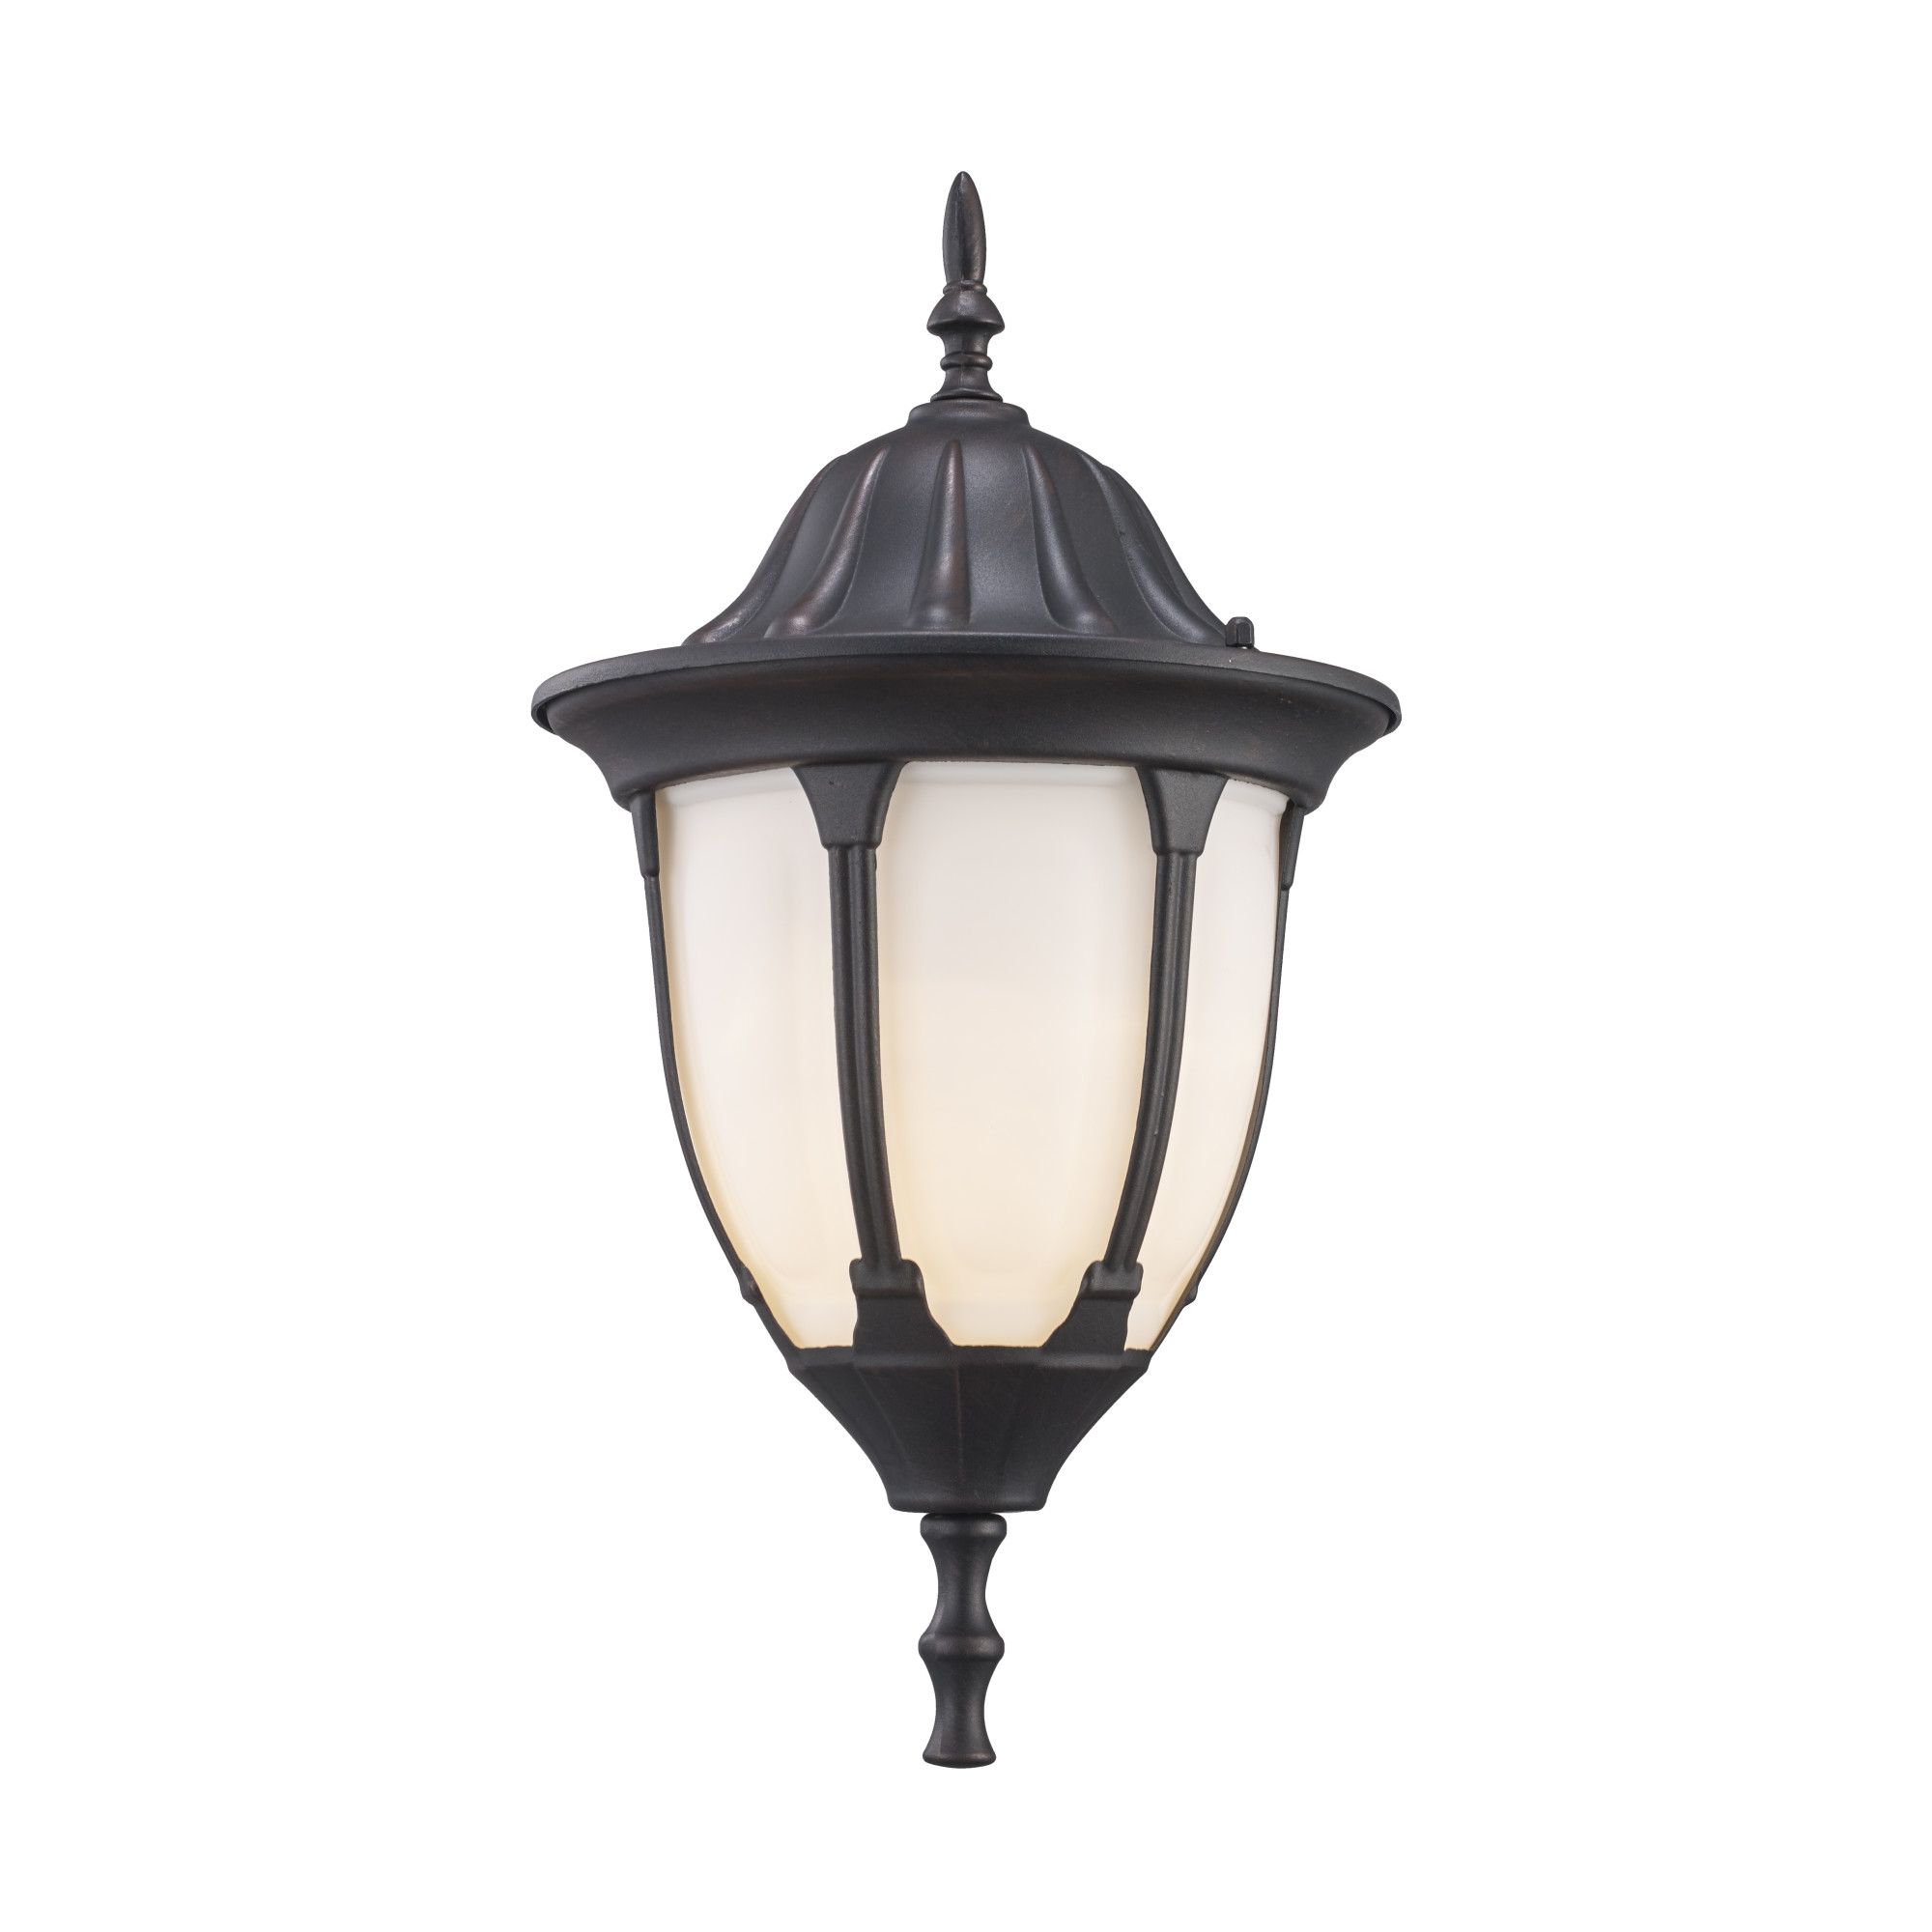 Trans Globe Lighting 4040 1 Light Up Lighting Outdoor Small Wall Sconce From The Outdoor - image 2 of 5